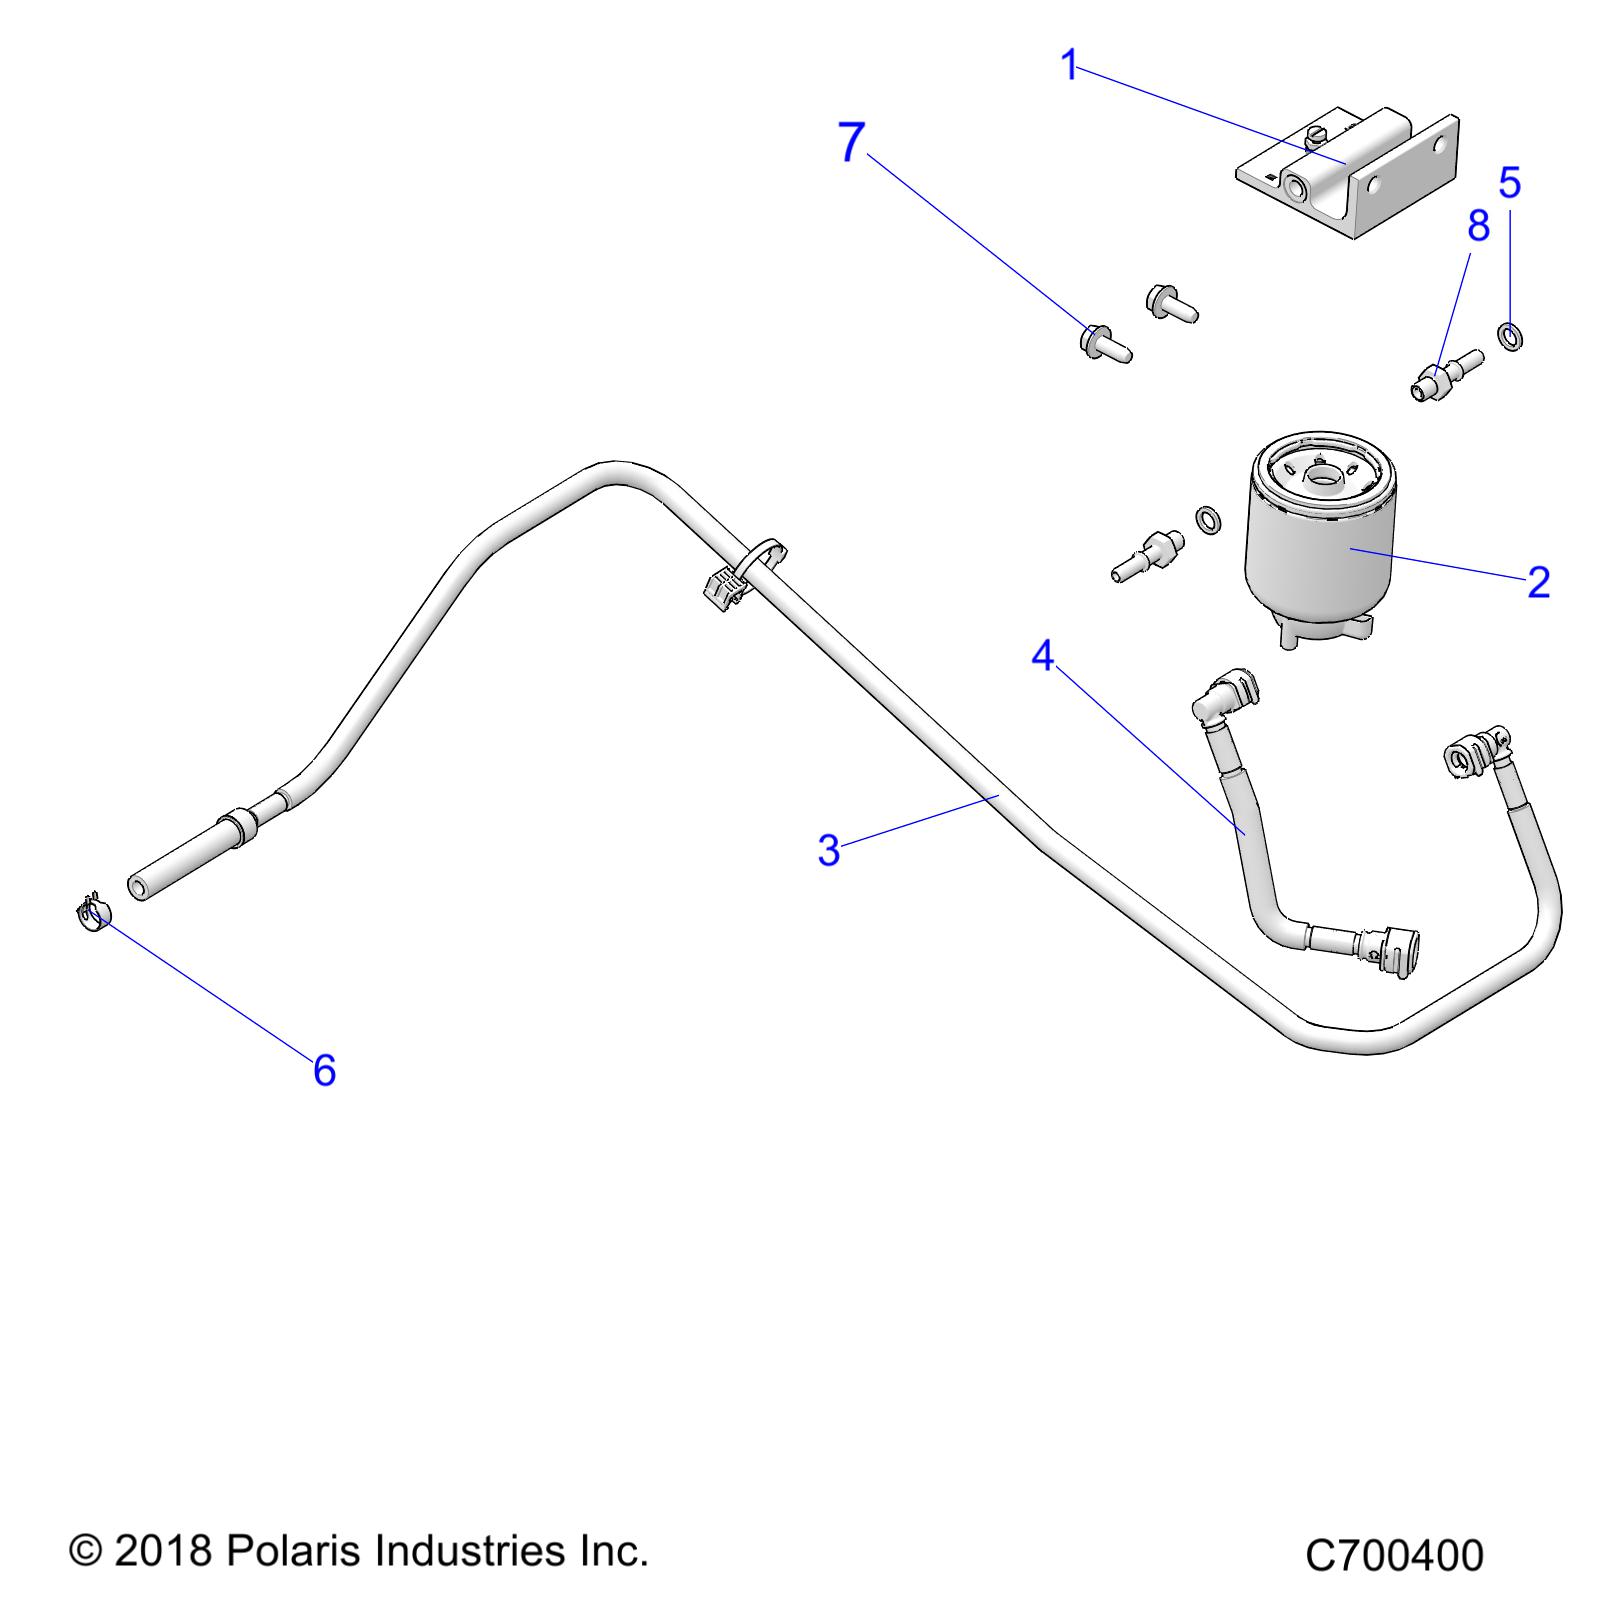 BODY, FUEL FILTER AND LINES - R20RRED4J1 (C700400)